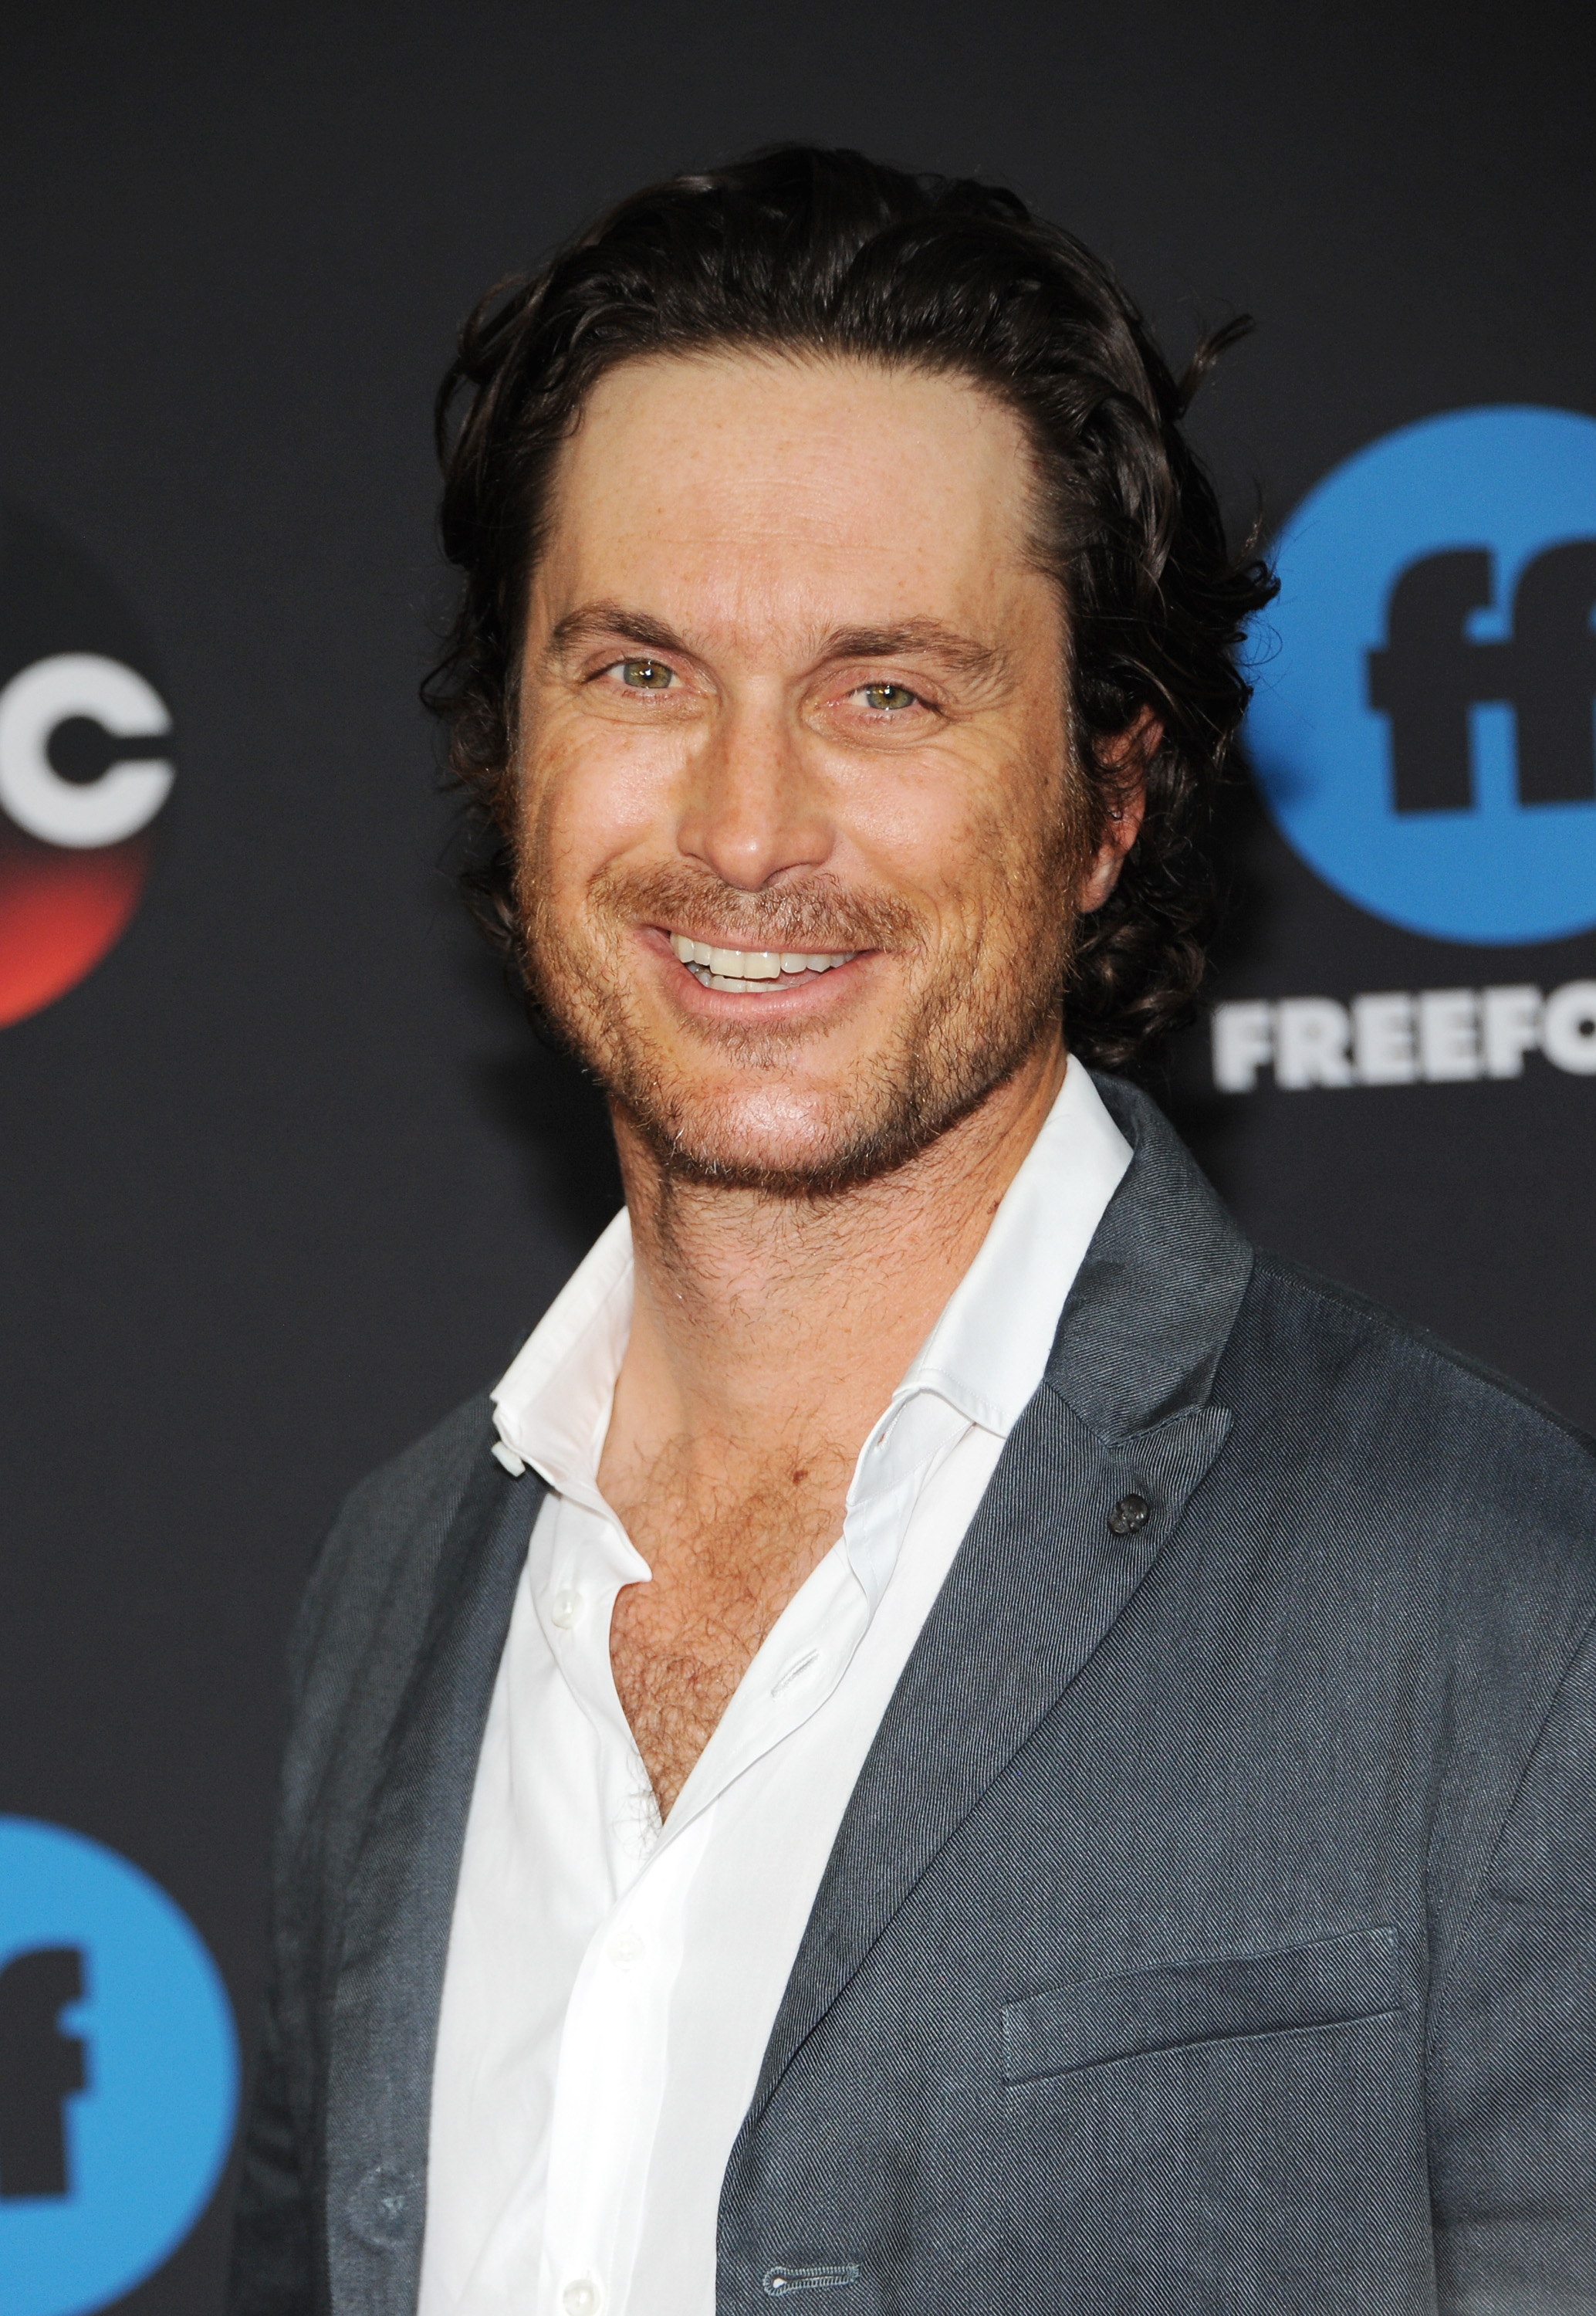 Oliver Hudson during 2018 Disney, ABC, Freeform Upfront on May 15, 2018 in New York City. | Source: Getty Images